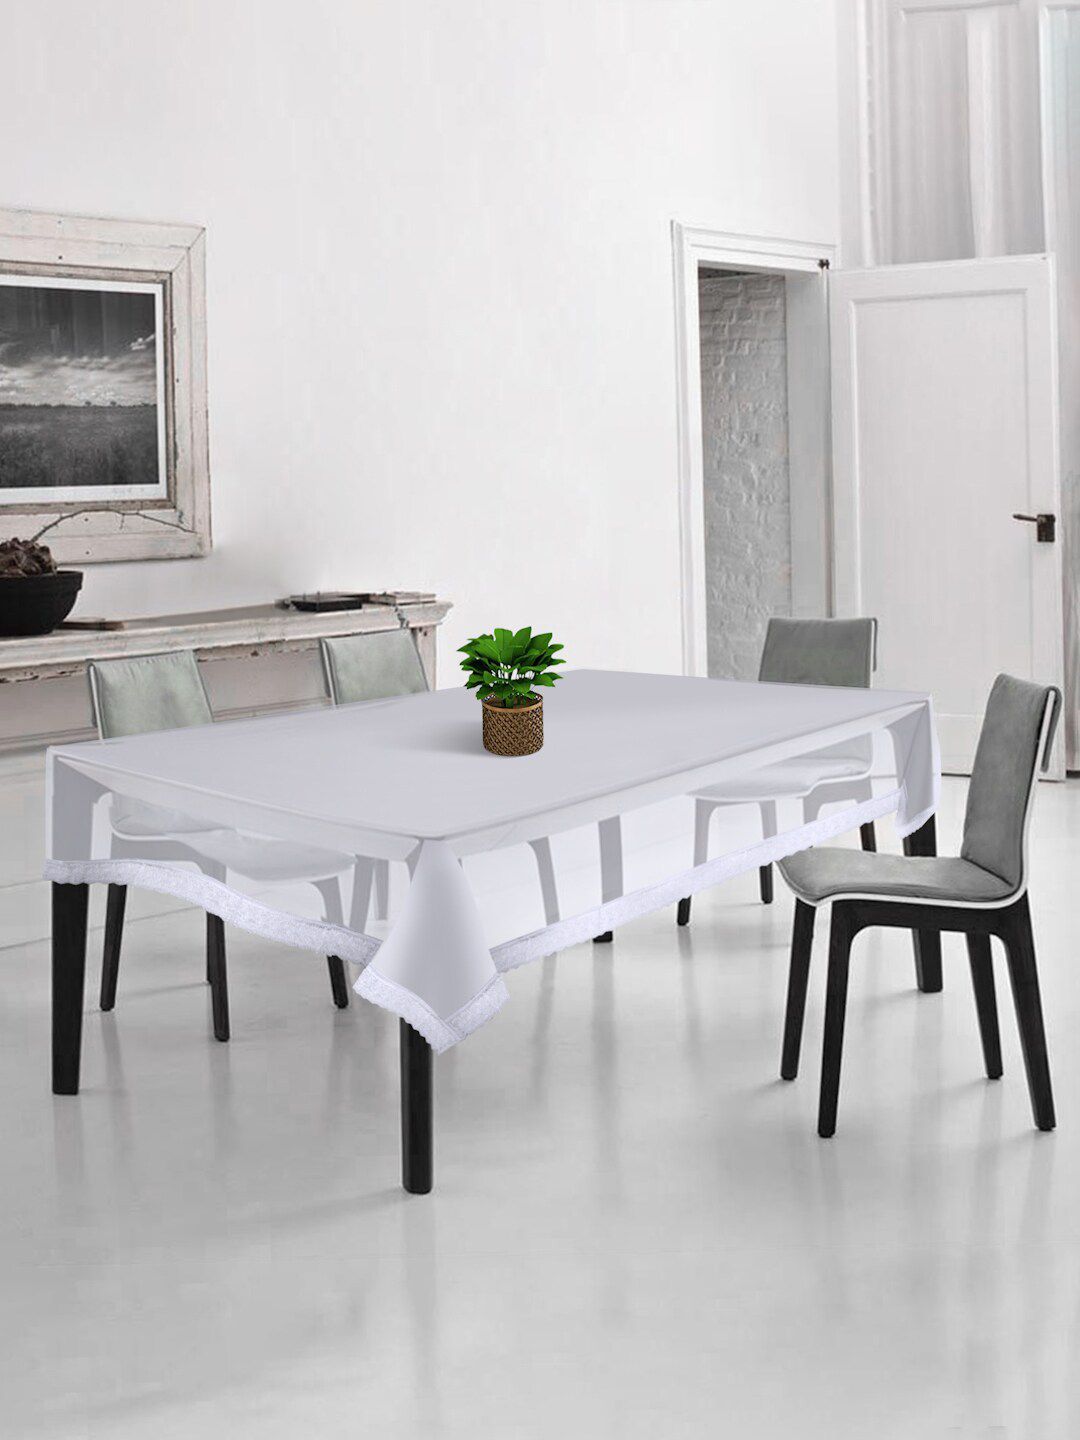 HOSTA HOMES Transparent Solid 6 Seater Table Covers Price in India